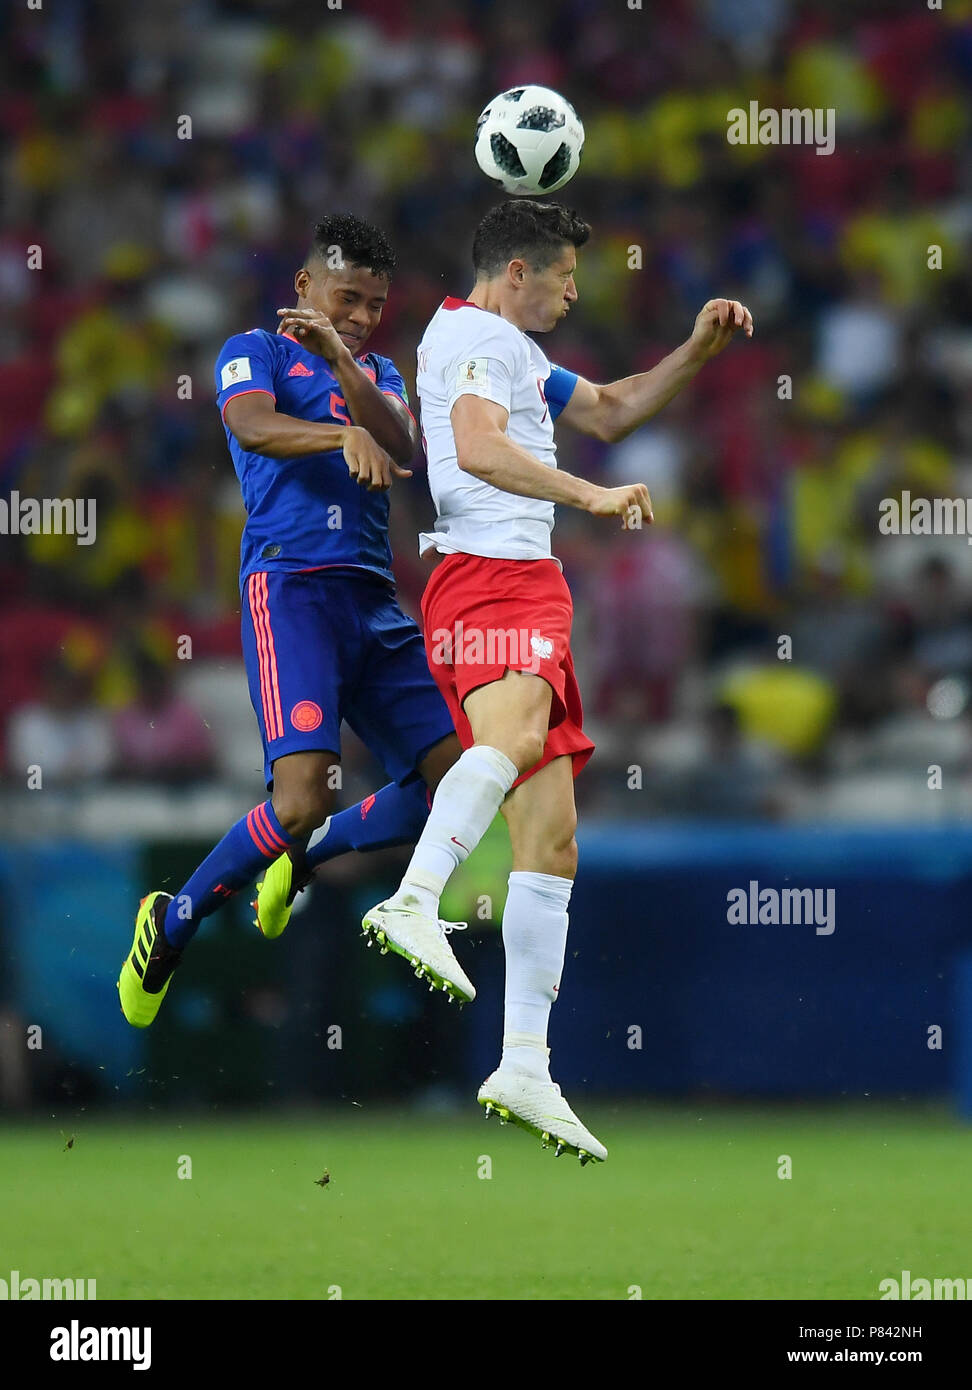 KAZAN, RUSSIA - JUNE 24: Juan Quintero of Colombia competes with Robert Lewandowski of Poland during the 2018 FIFA World Cup Russia group H match between Poland and Colombia at Kazan Arena on June 24, 2018 in Kazan, Russia. (Photo by Lukasz Laskowski/PressFocus/MB Media) Stock Photo